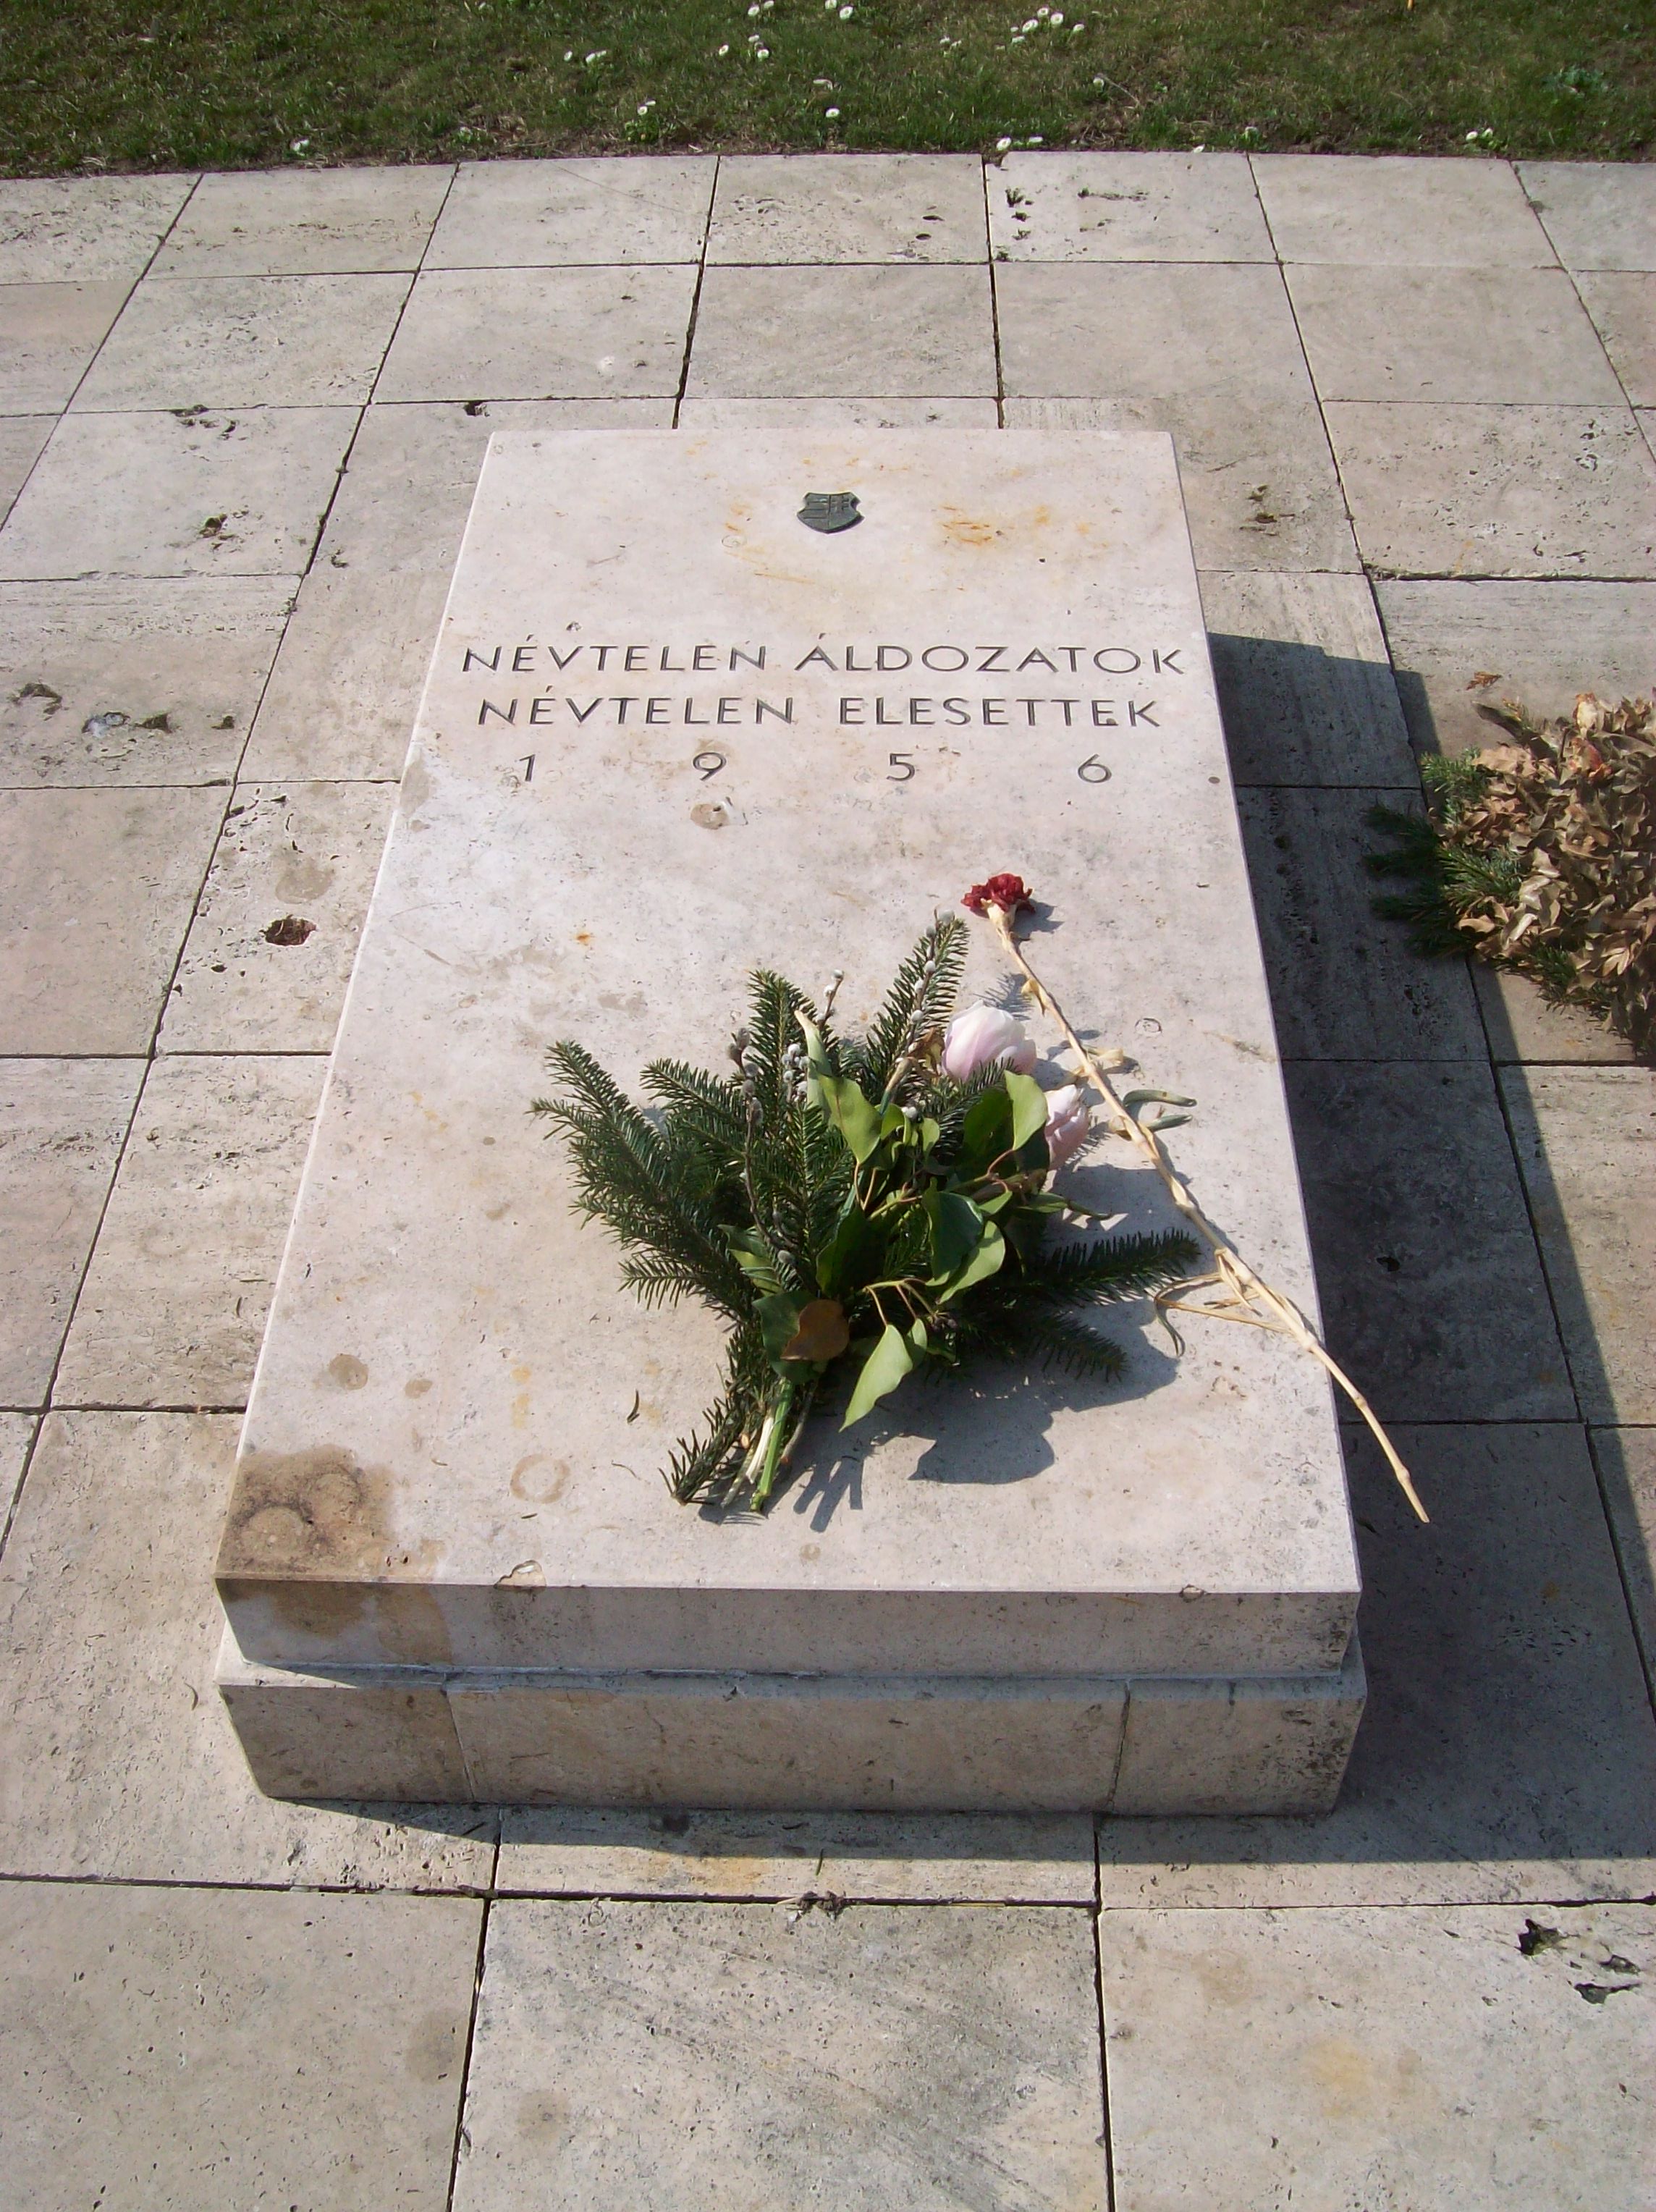 Tomb commemorating the anonymous victims of the revolution